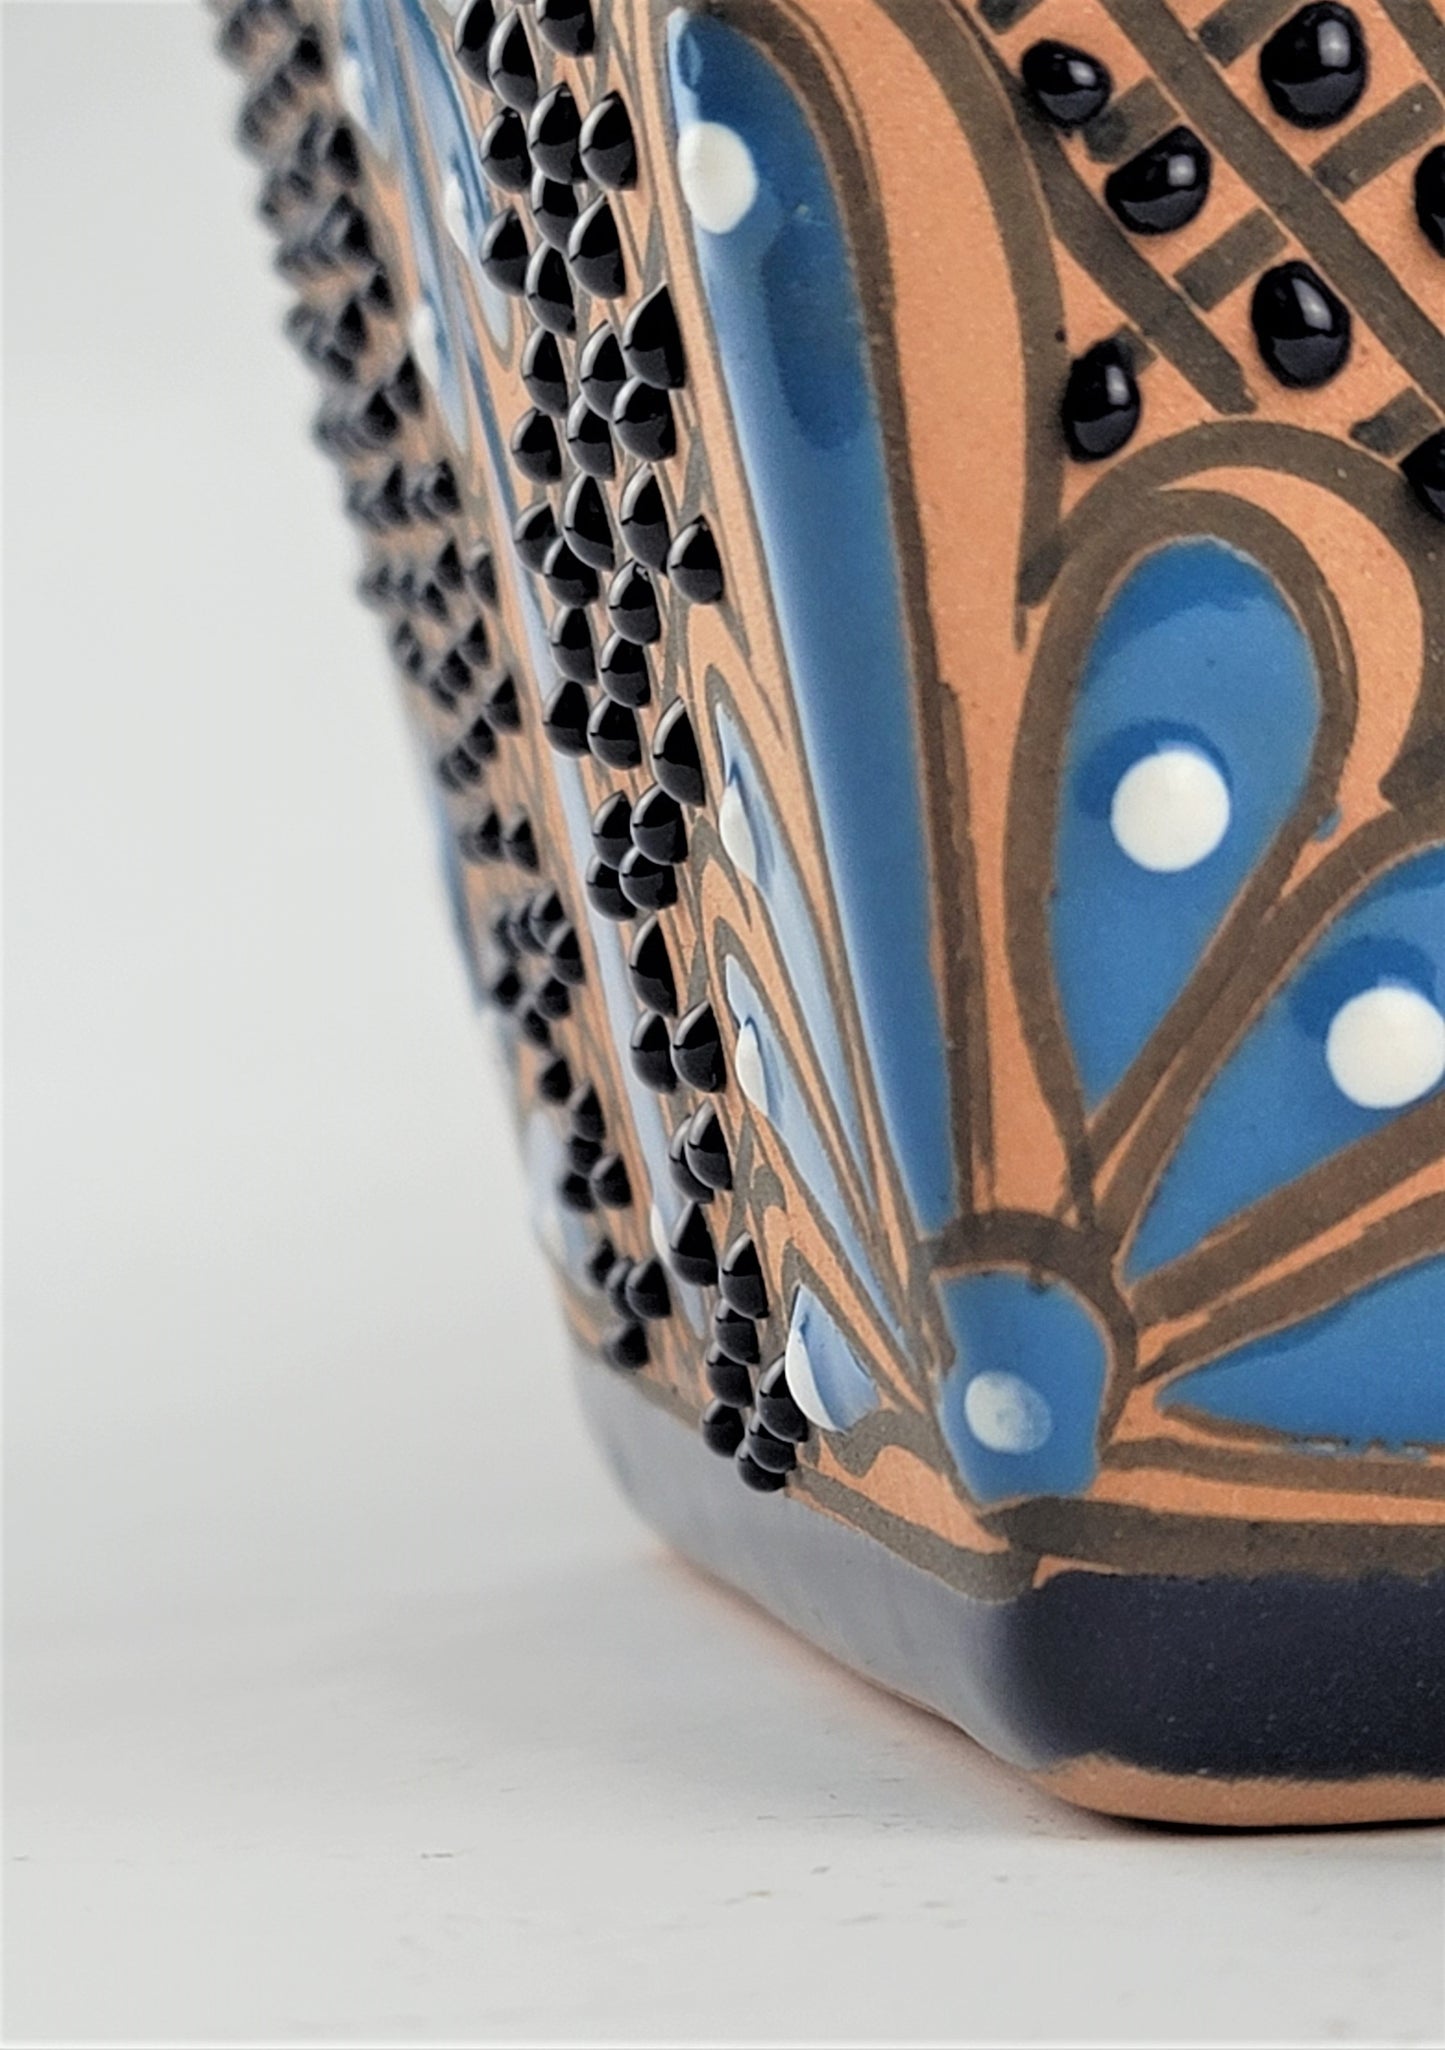 Talavera Mexican pottery Hand-Painted Flower Design Planter